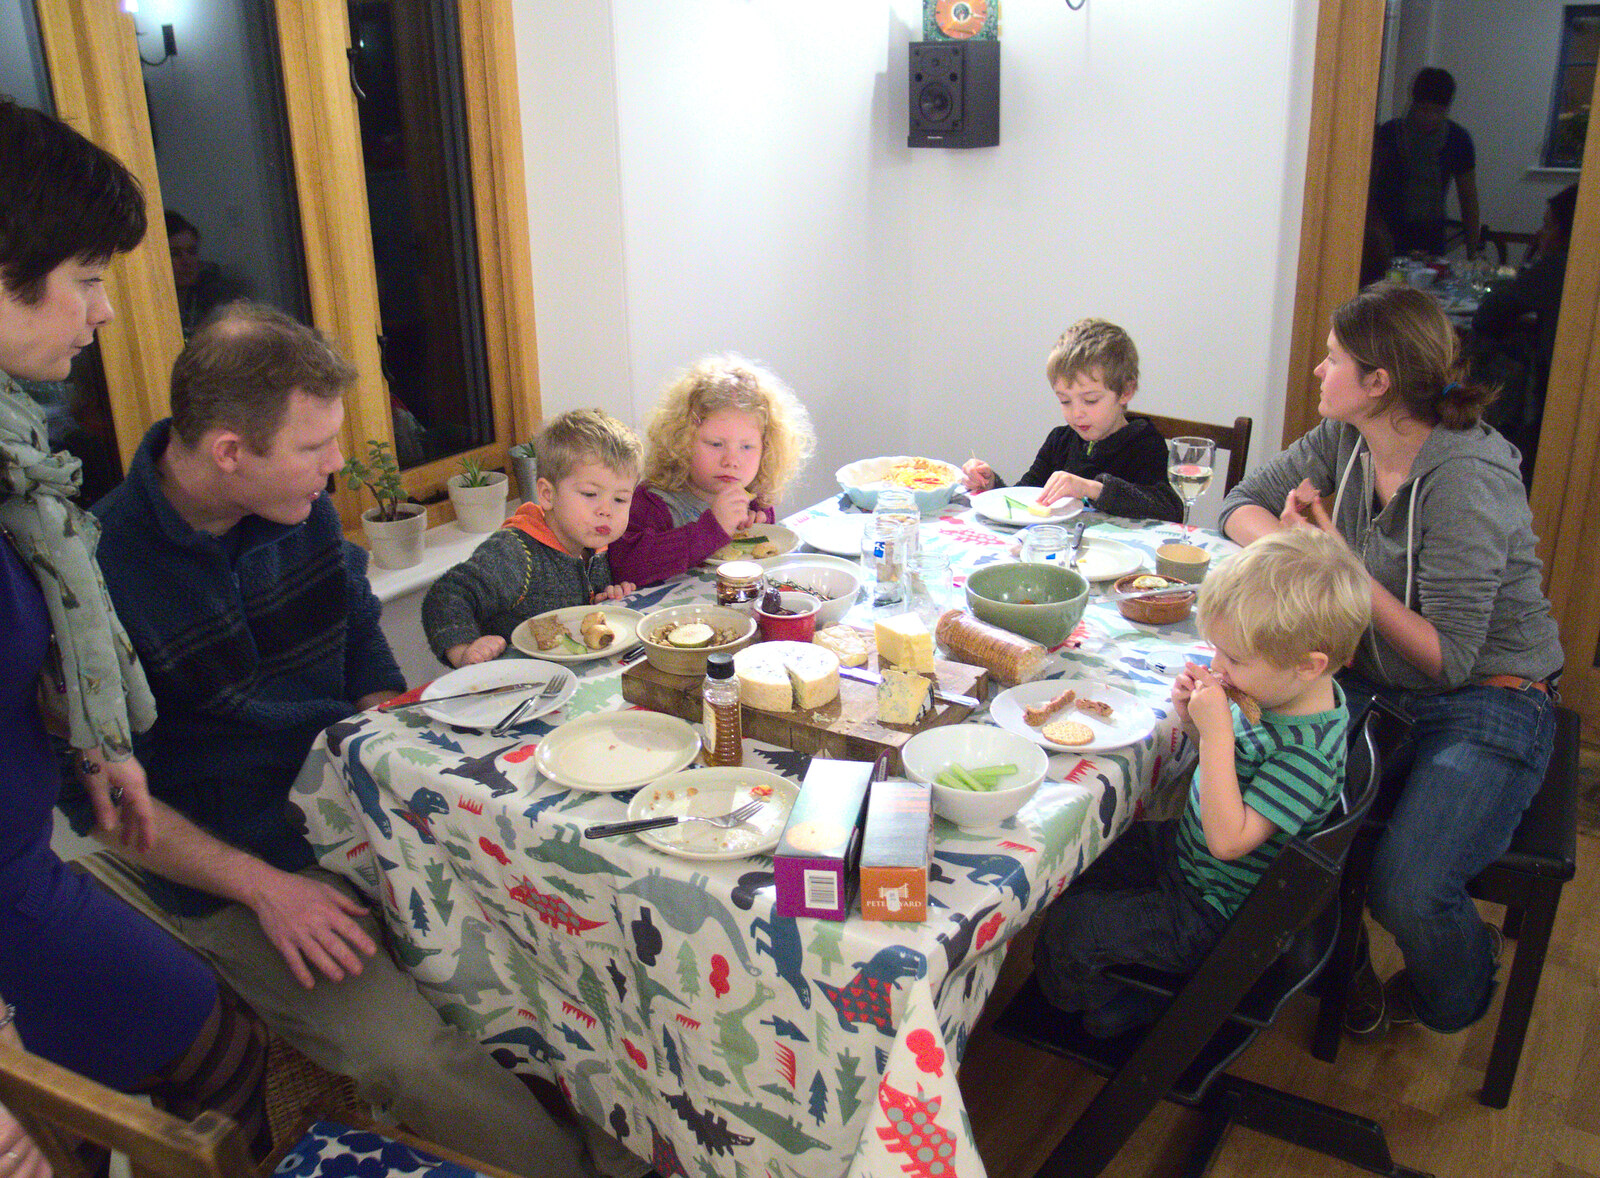 The Mikey-P Massive come over for tea from A Trip to Abbey Gardens, Bury St. Edmunds, Suffolk - 20th December 2014